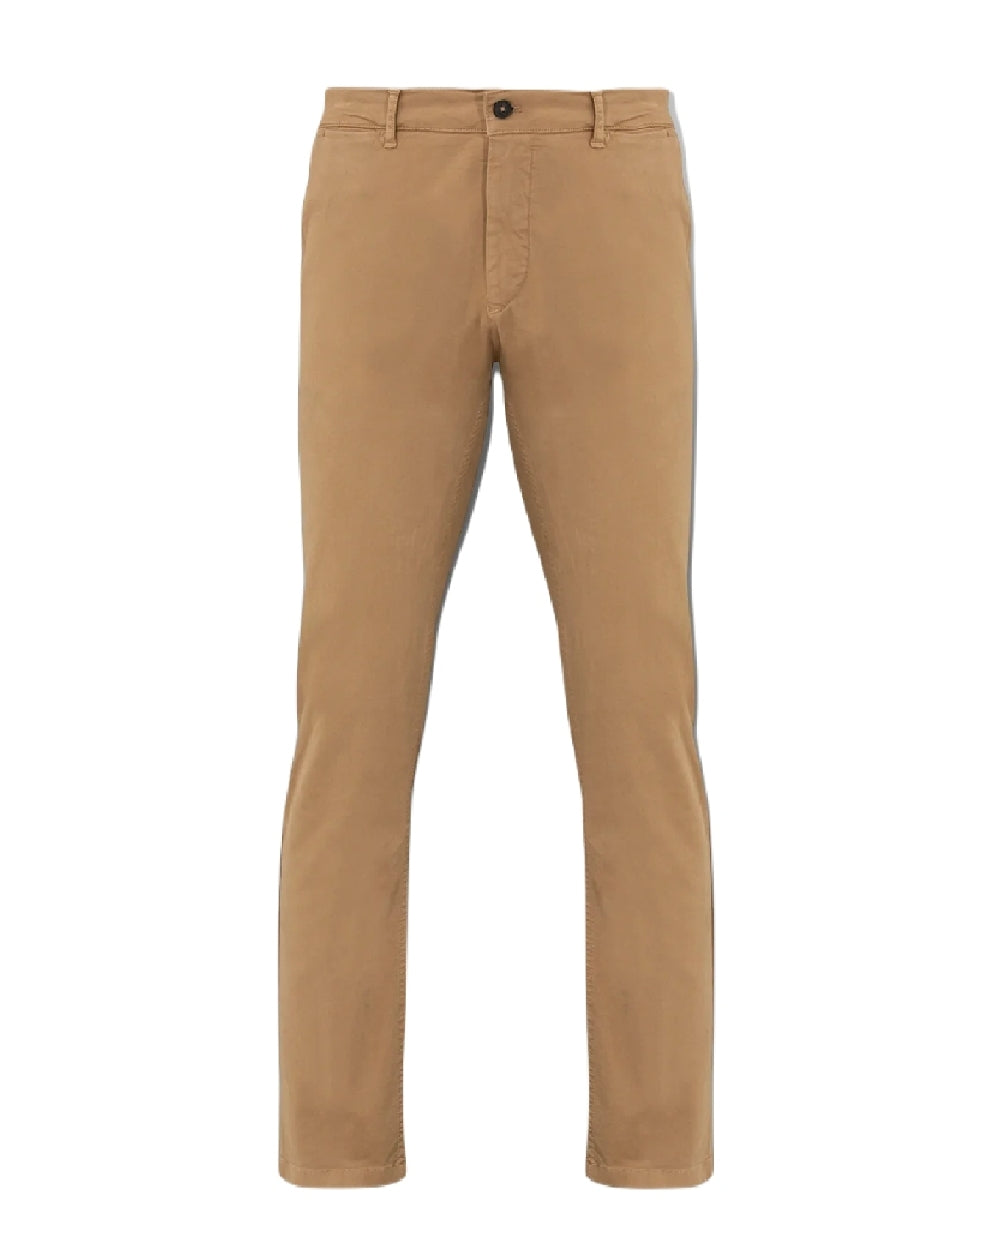 Alan Paine Bamforth Chino Trousers in Sand 